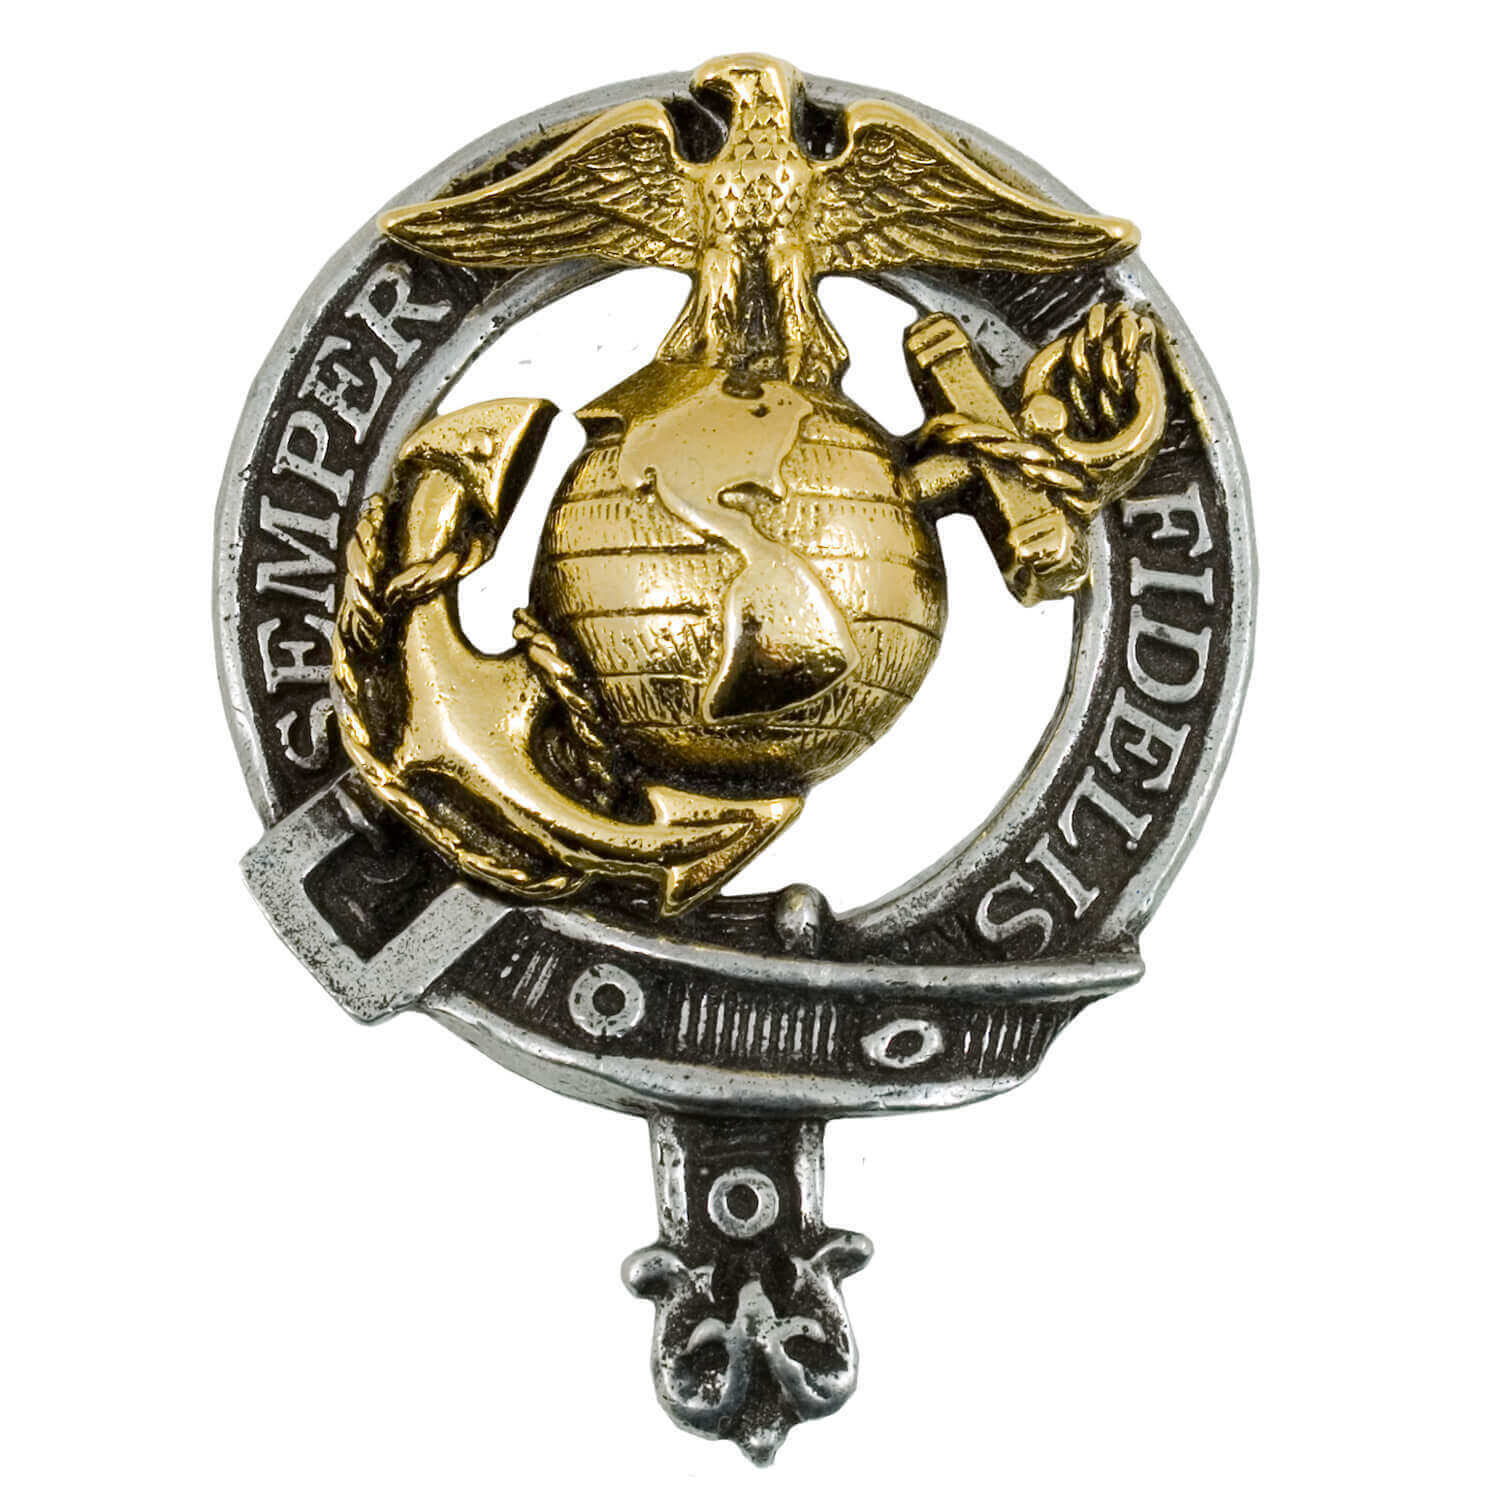 U.S. Marine Corps Gold Plated Badge/Brooch - Made In The U.S